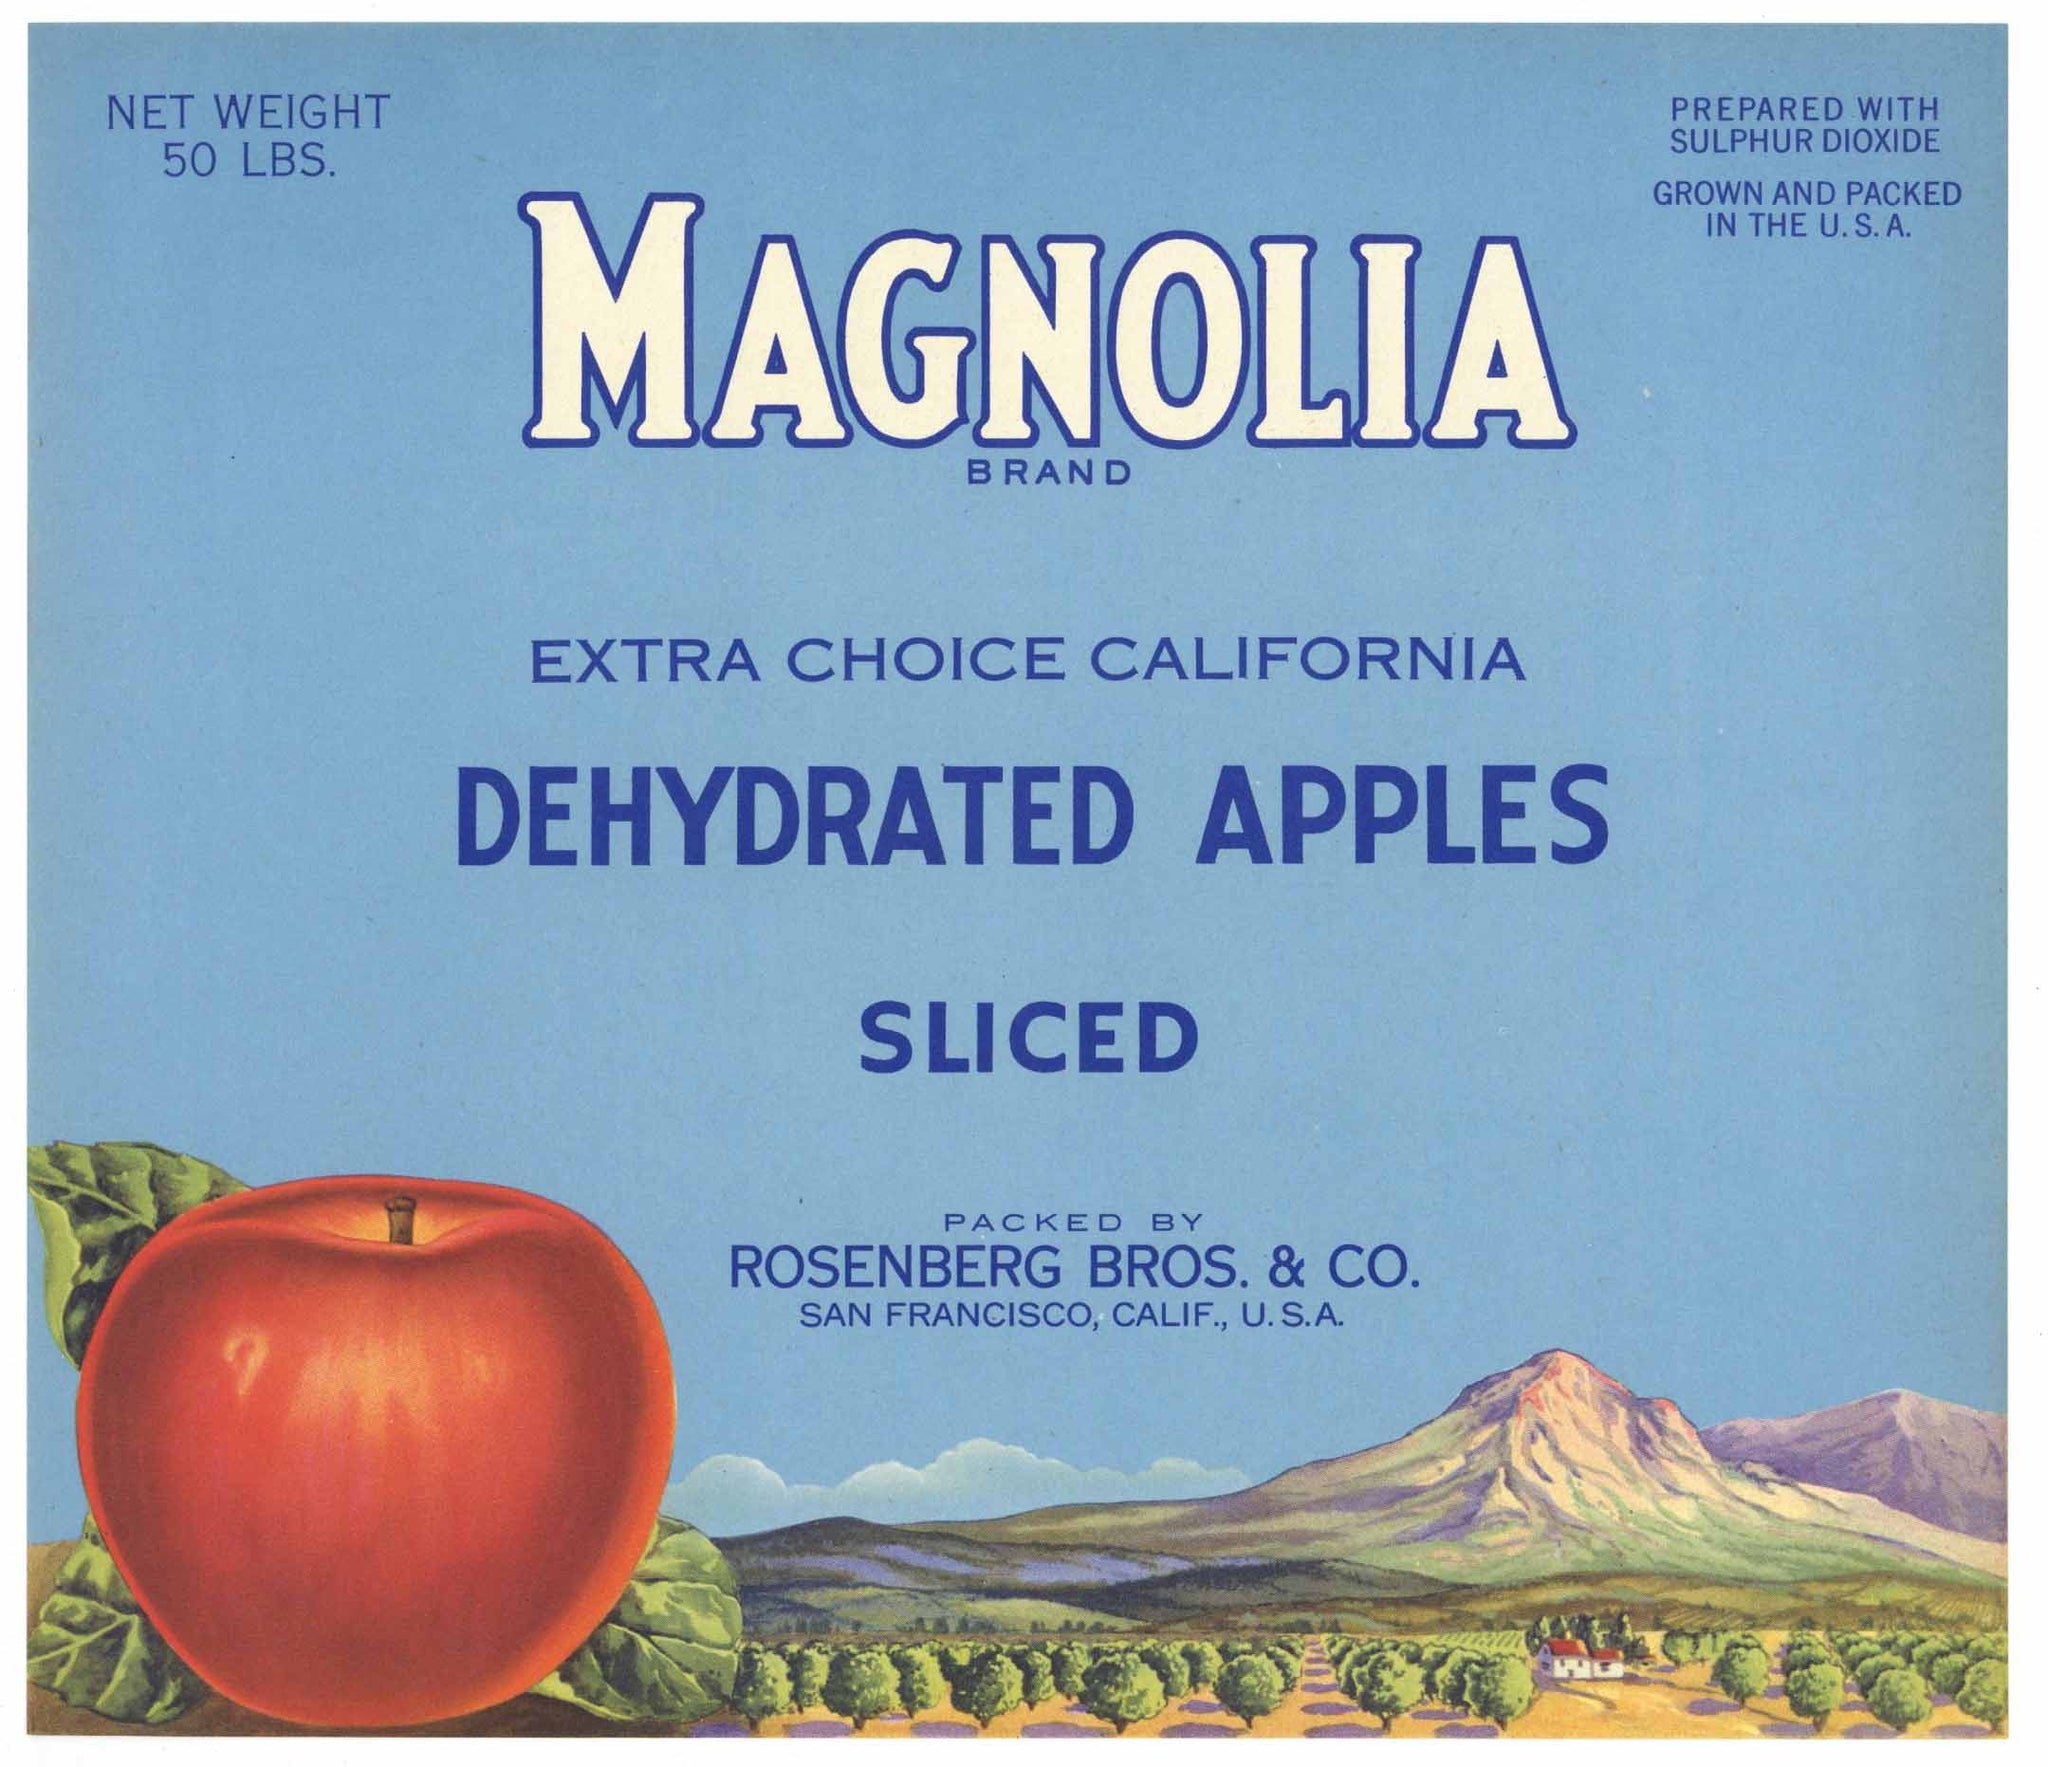 Magnolia Brand Vintage Dehydrated Apple Crate Label